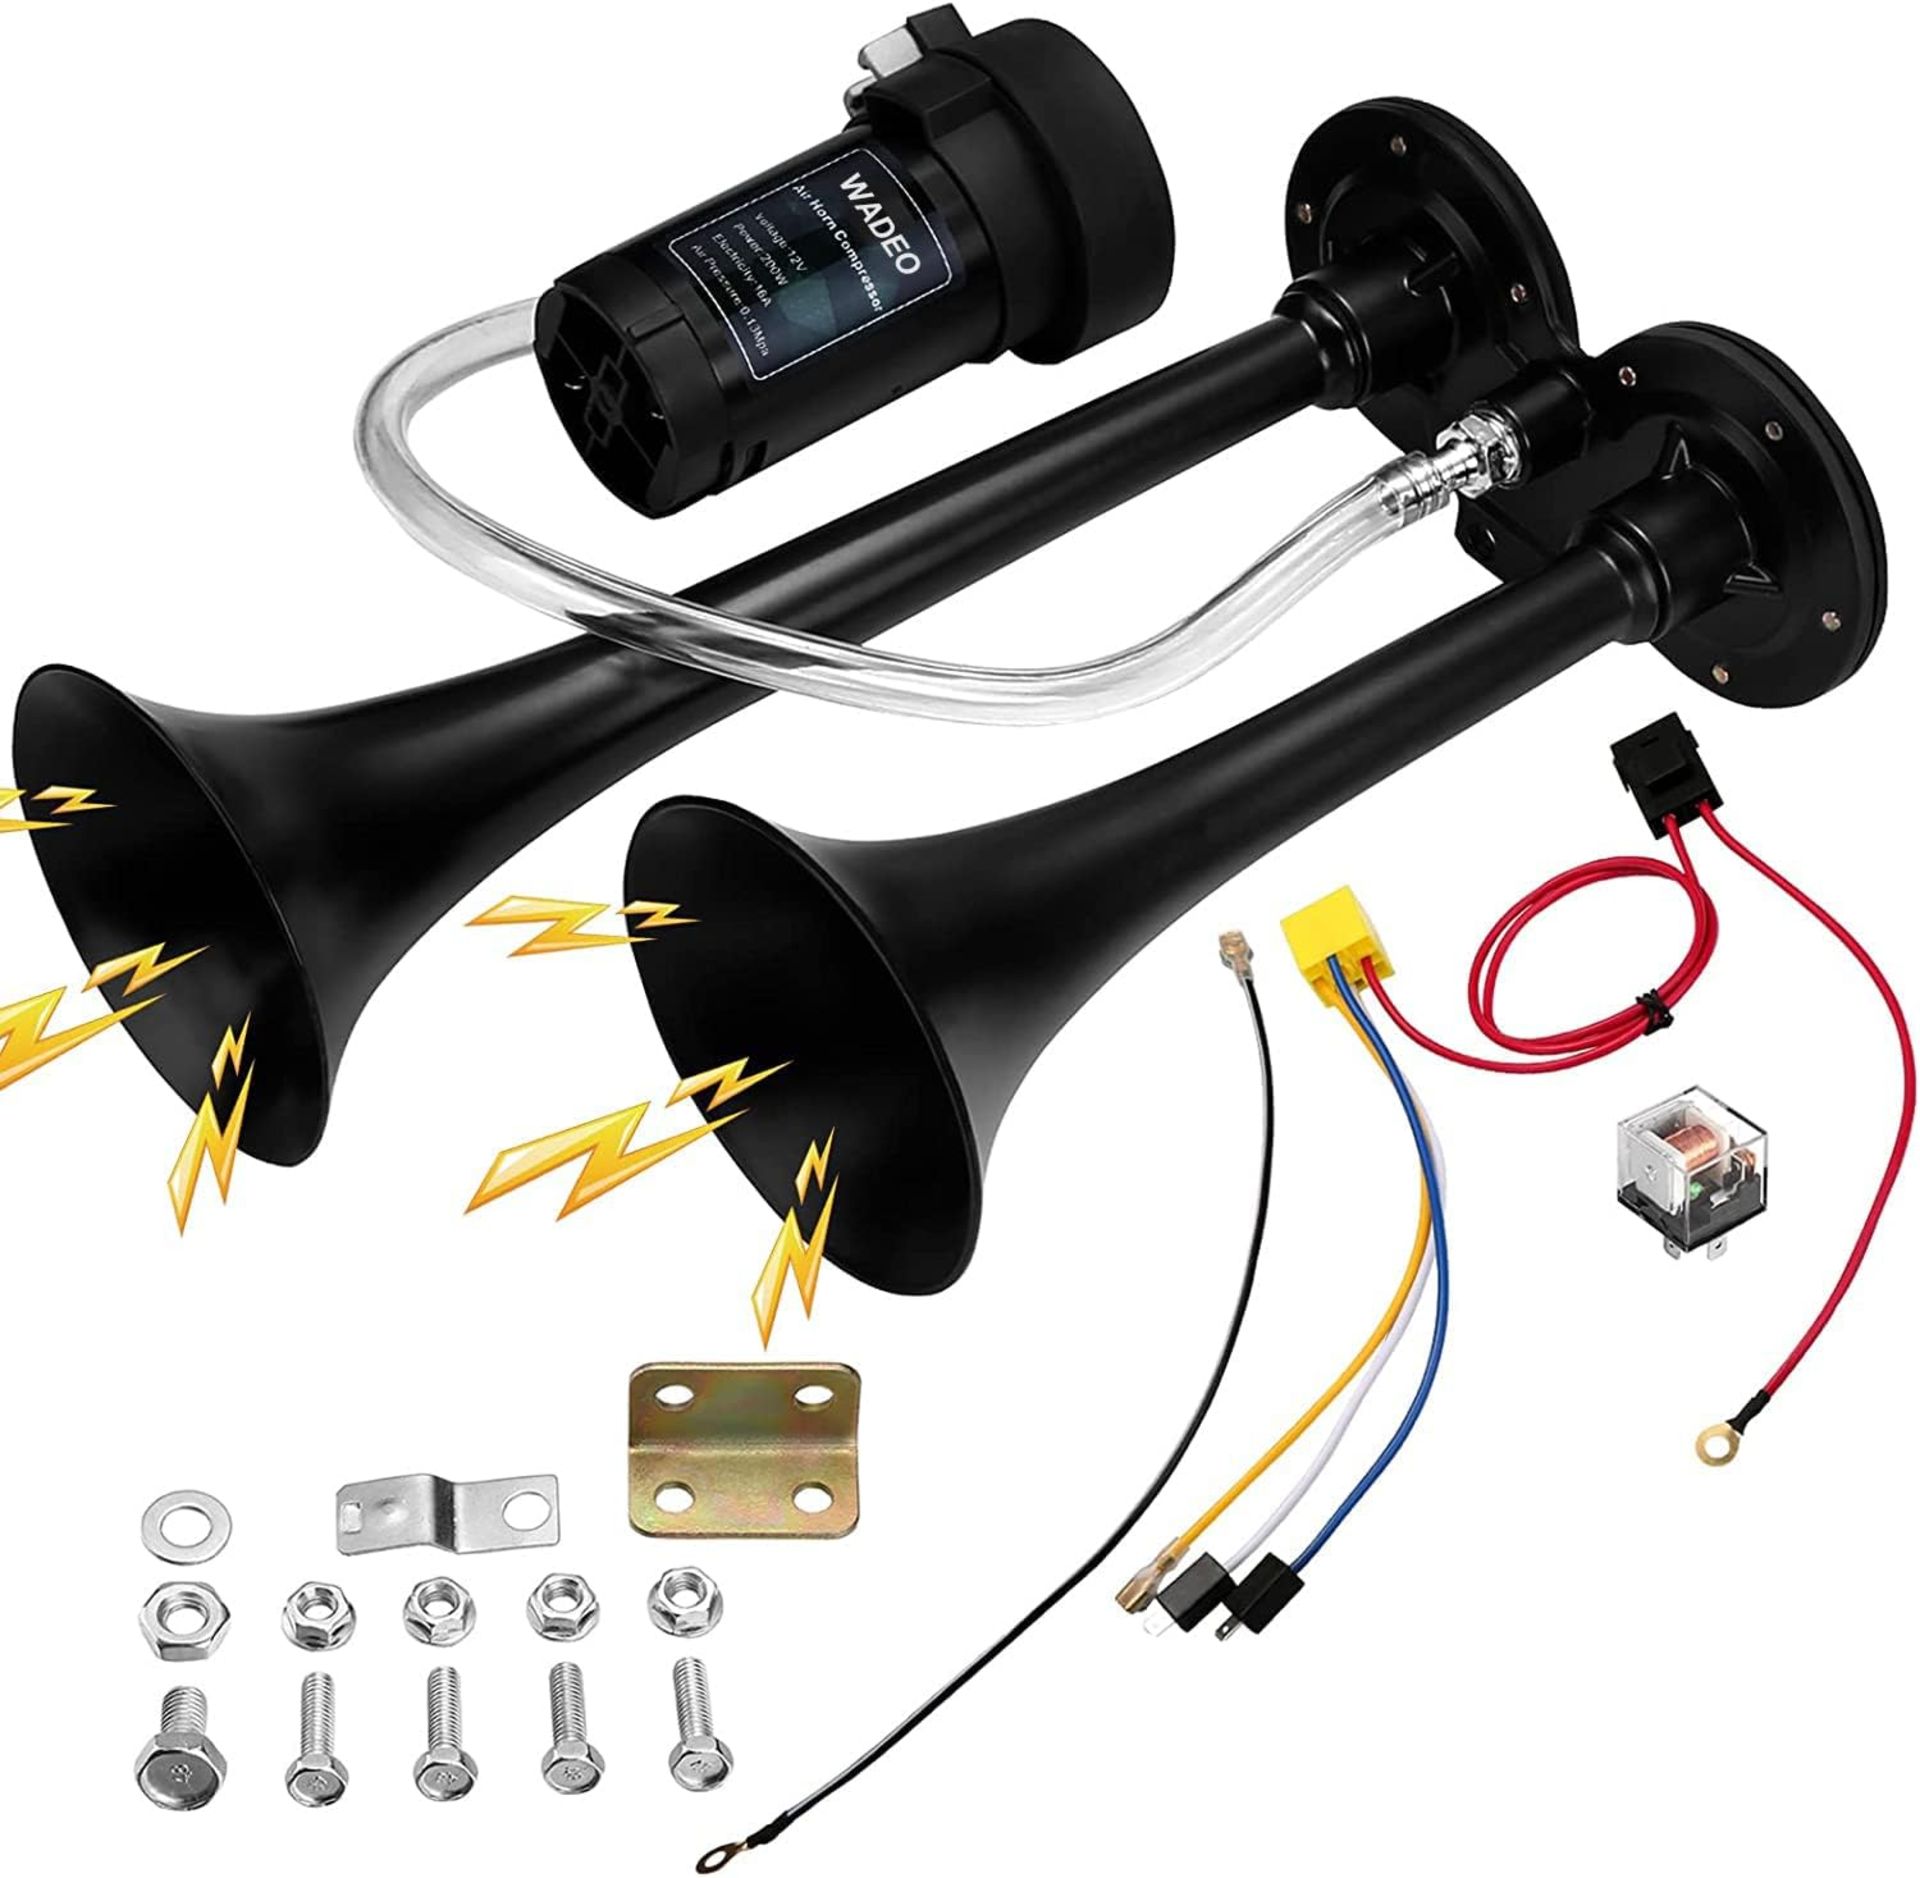 WADEO 12V 150db Car Air Horn, Super Loud Dual Trumpet Air Horn Kit with Compressor for Any 12V